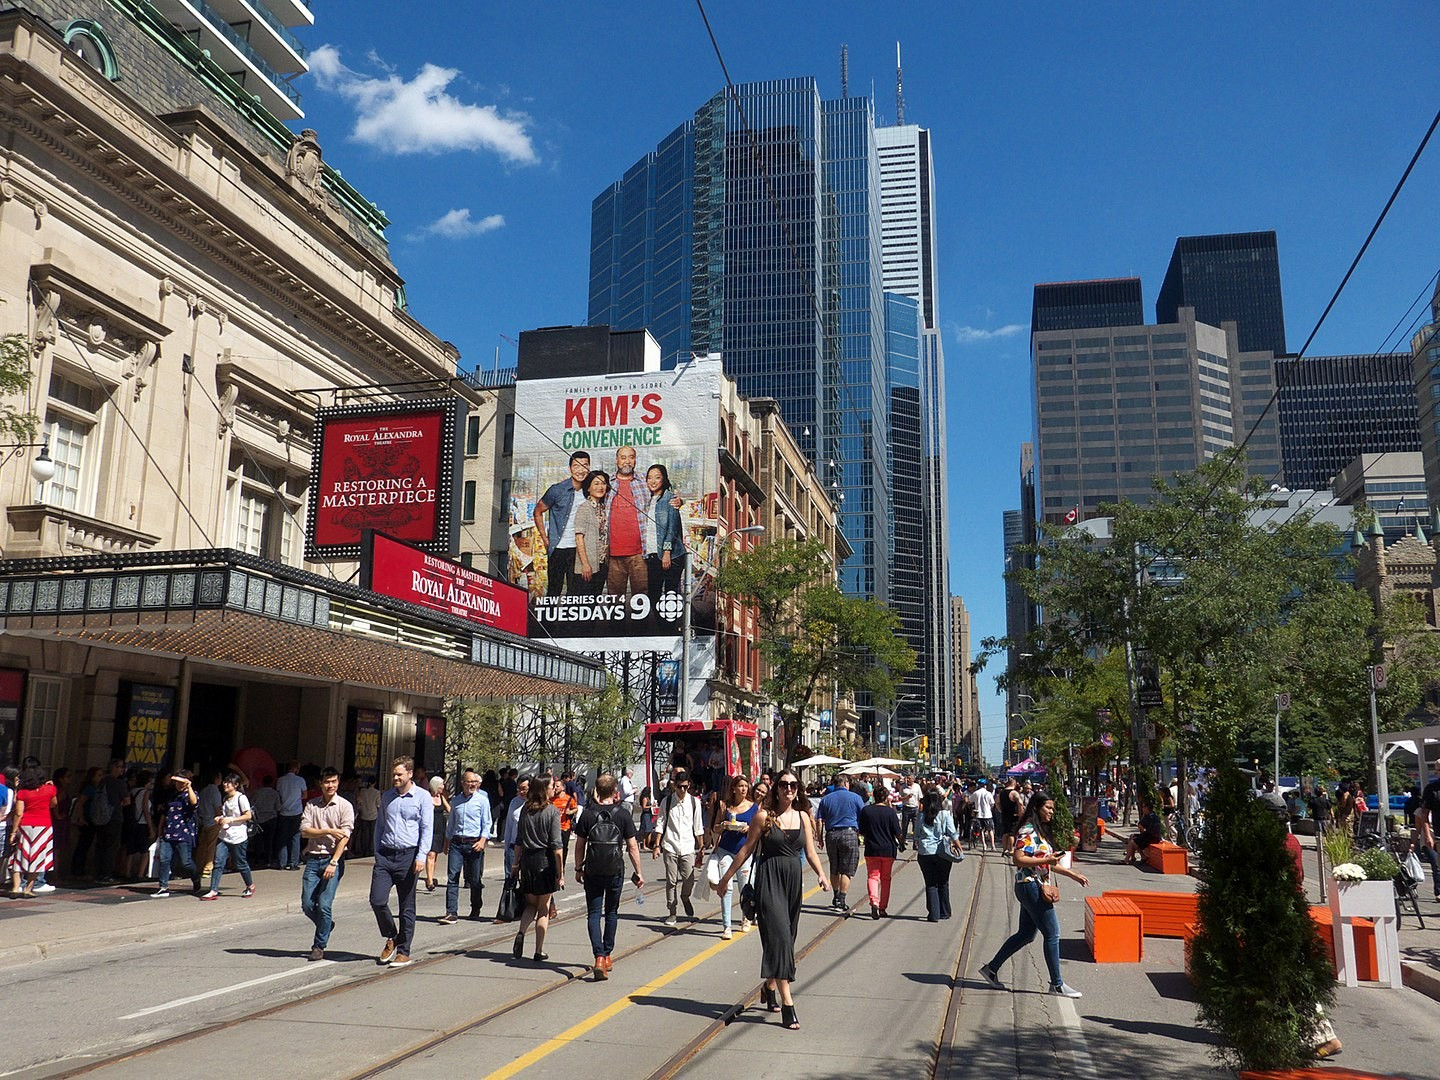 By Vlad Podvorny - TIFF comes in Toronto, CC BY 2.0, https://commons.wikimedia.org/w/index.php?curid=56226663